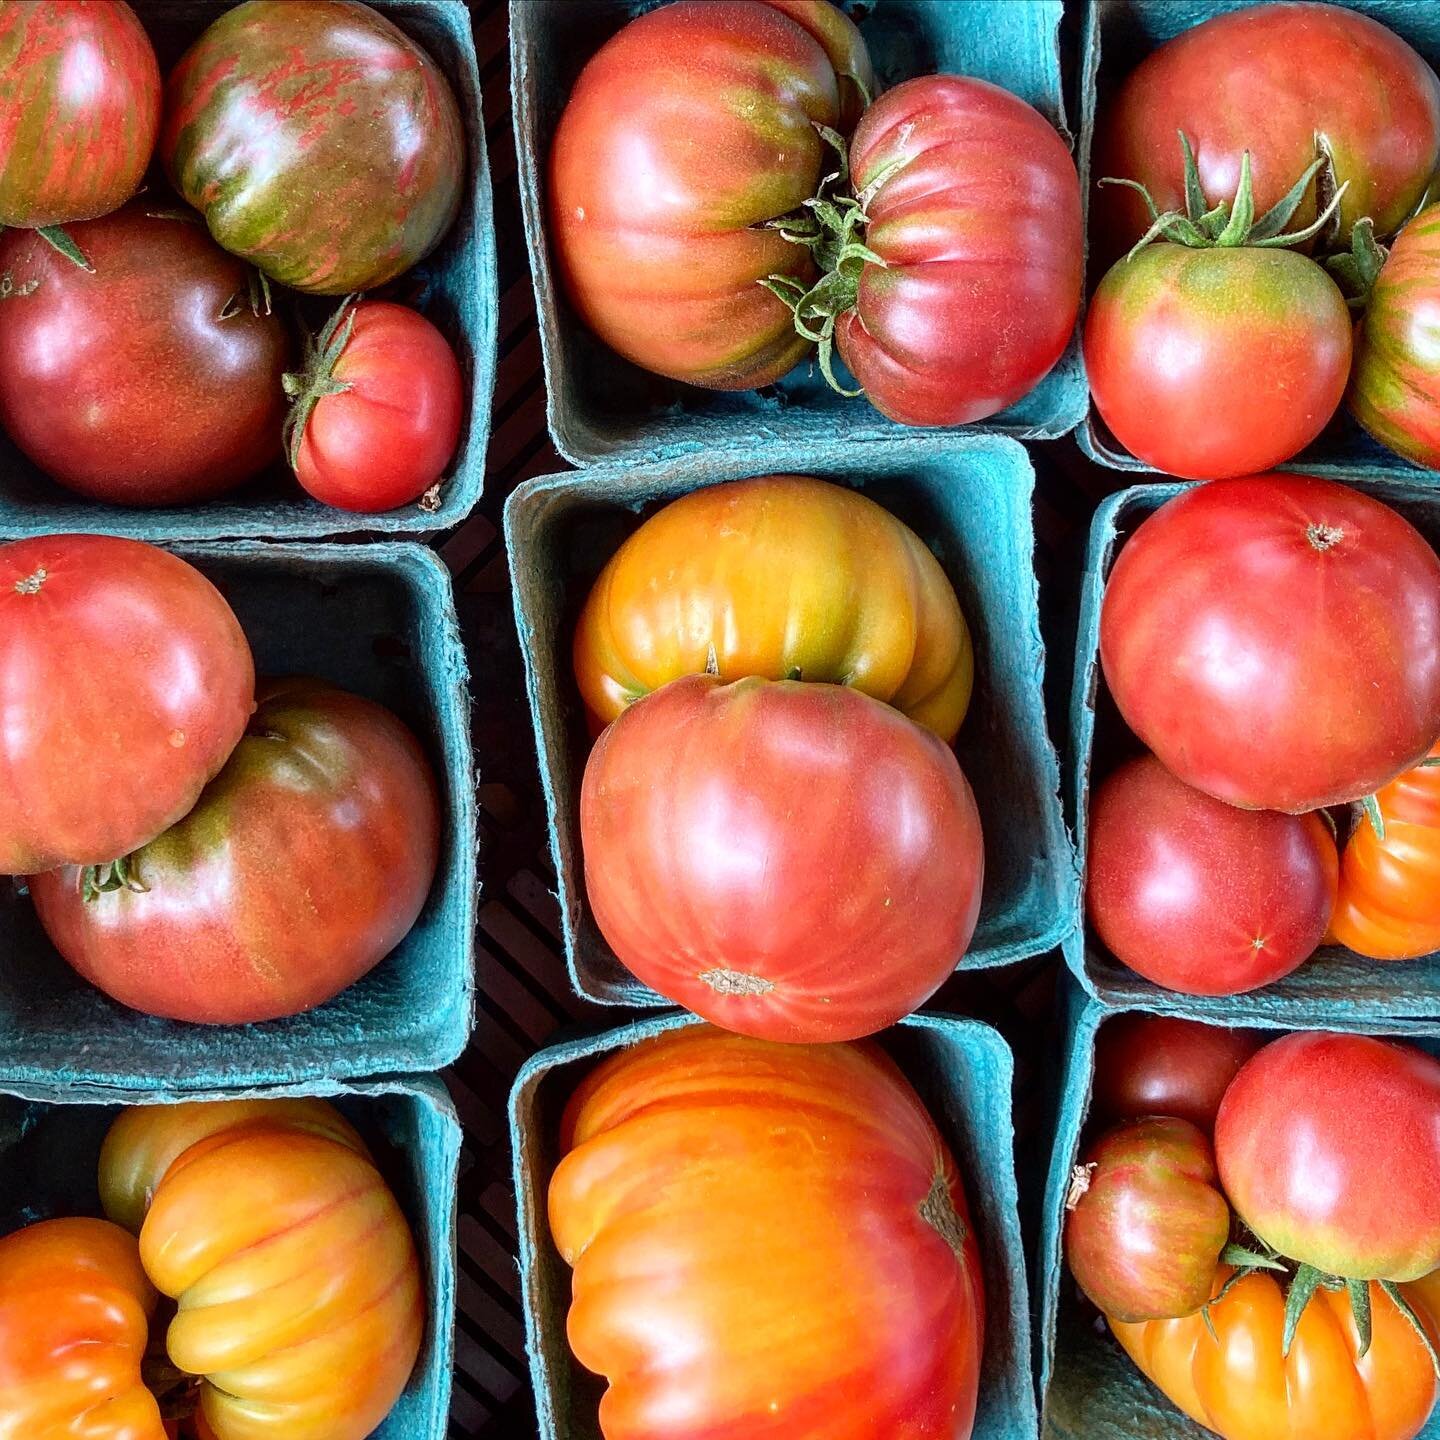 We grow a wide variety of tomatoes here. Yellow, orange, purple, pink, and even a few red. And yes, they do taste different! In general, the lighter color tomatoes (yellow and orange) are less acidic and more mild in flavor. The darker tomatoes (purp